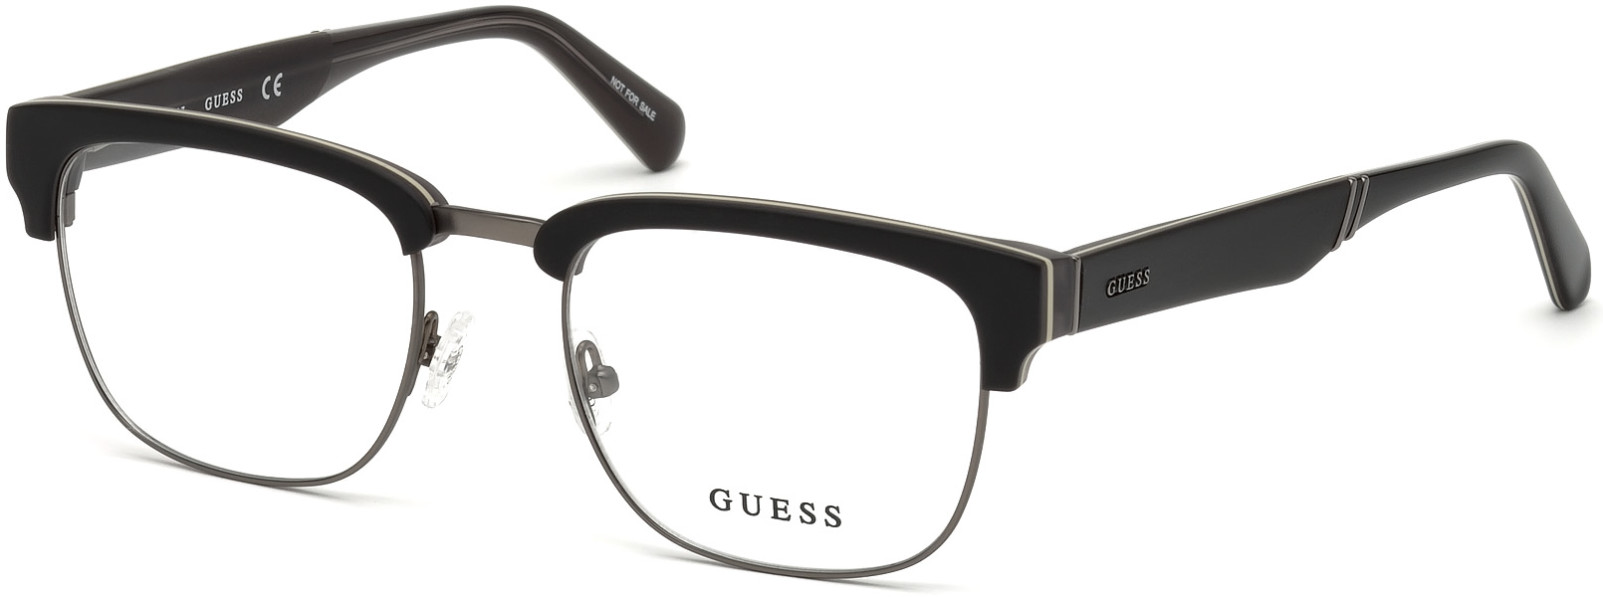 GUESS 1942 002